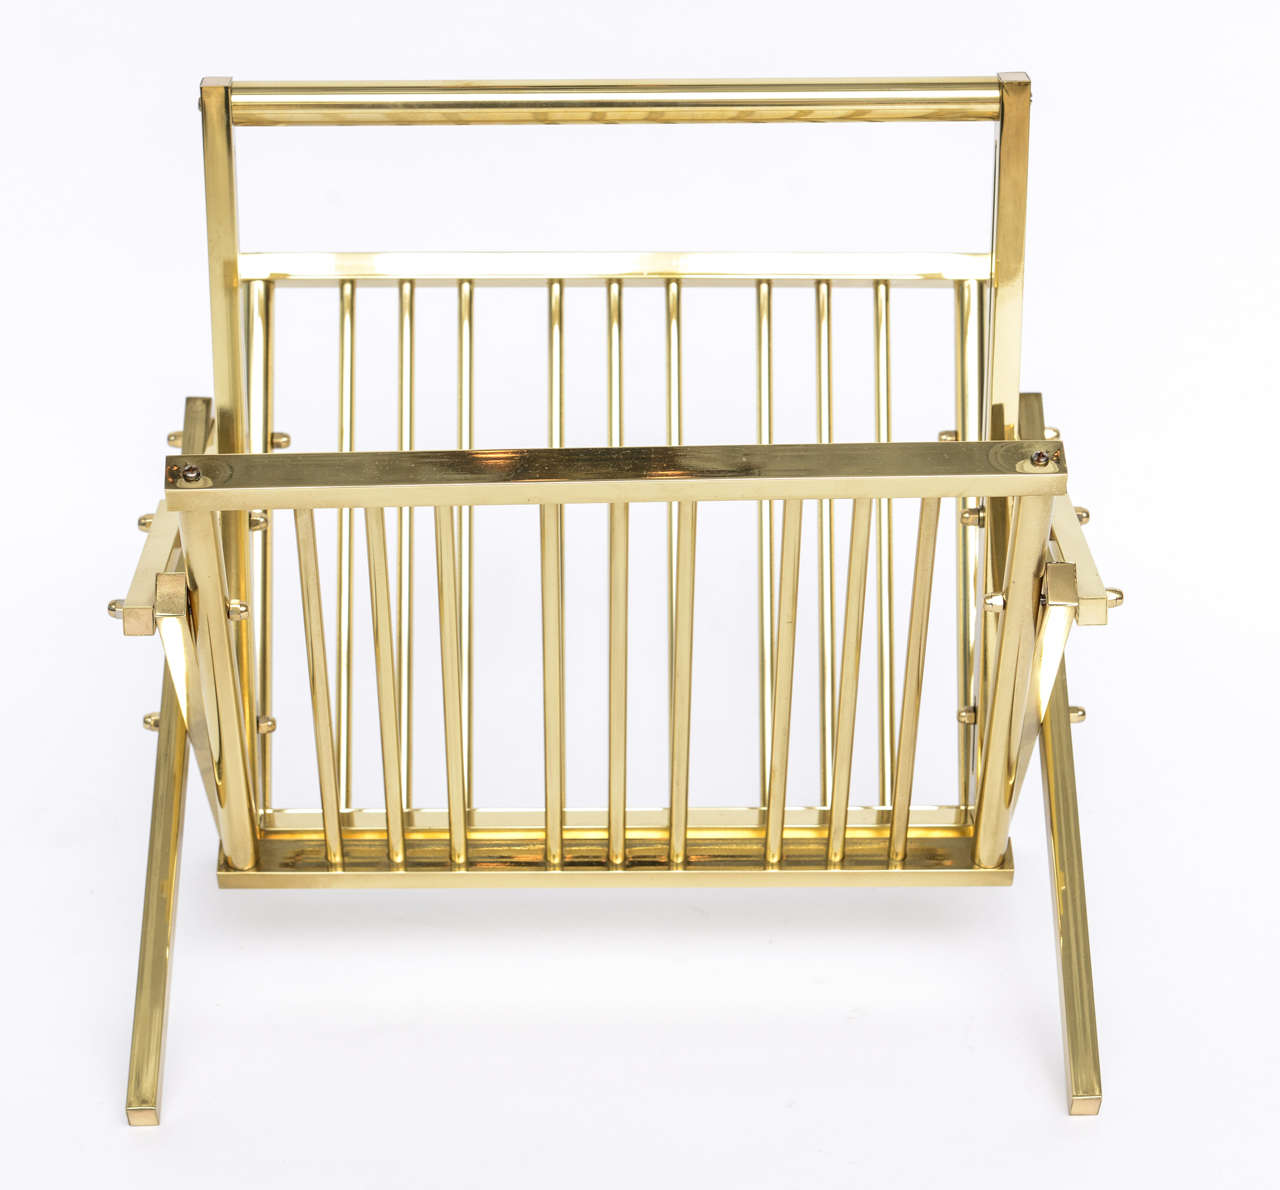 Solid, substantial, and stylish 70's Italian-made magazine rack in polished solid brass folds flat.